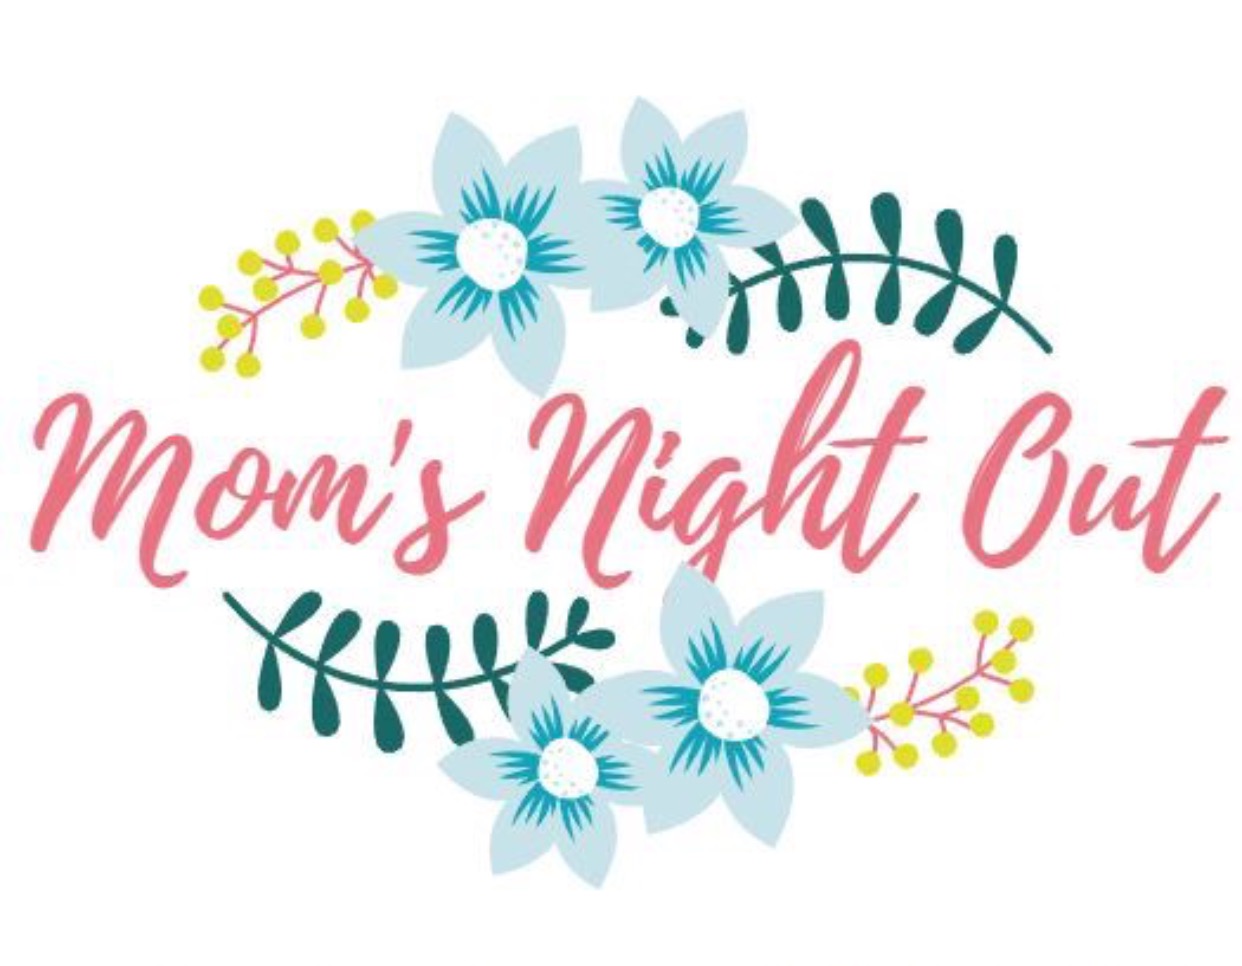 Image of a sign that has drawn out flower embellishments with the words "Mom's Night Out" spelled out in cursive writing. 